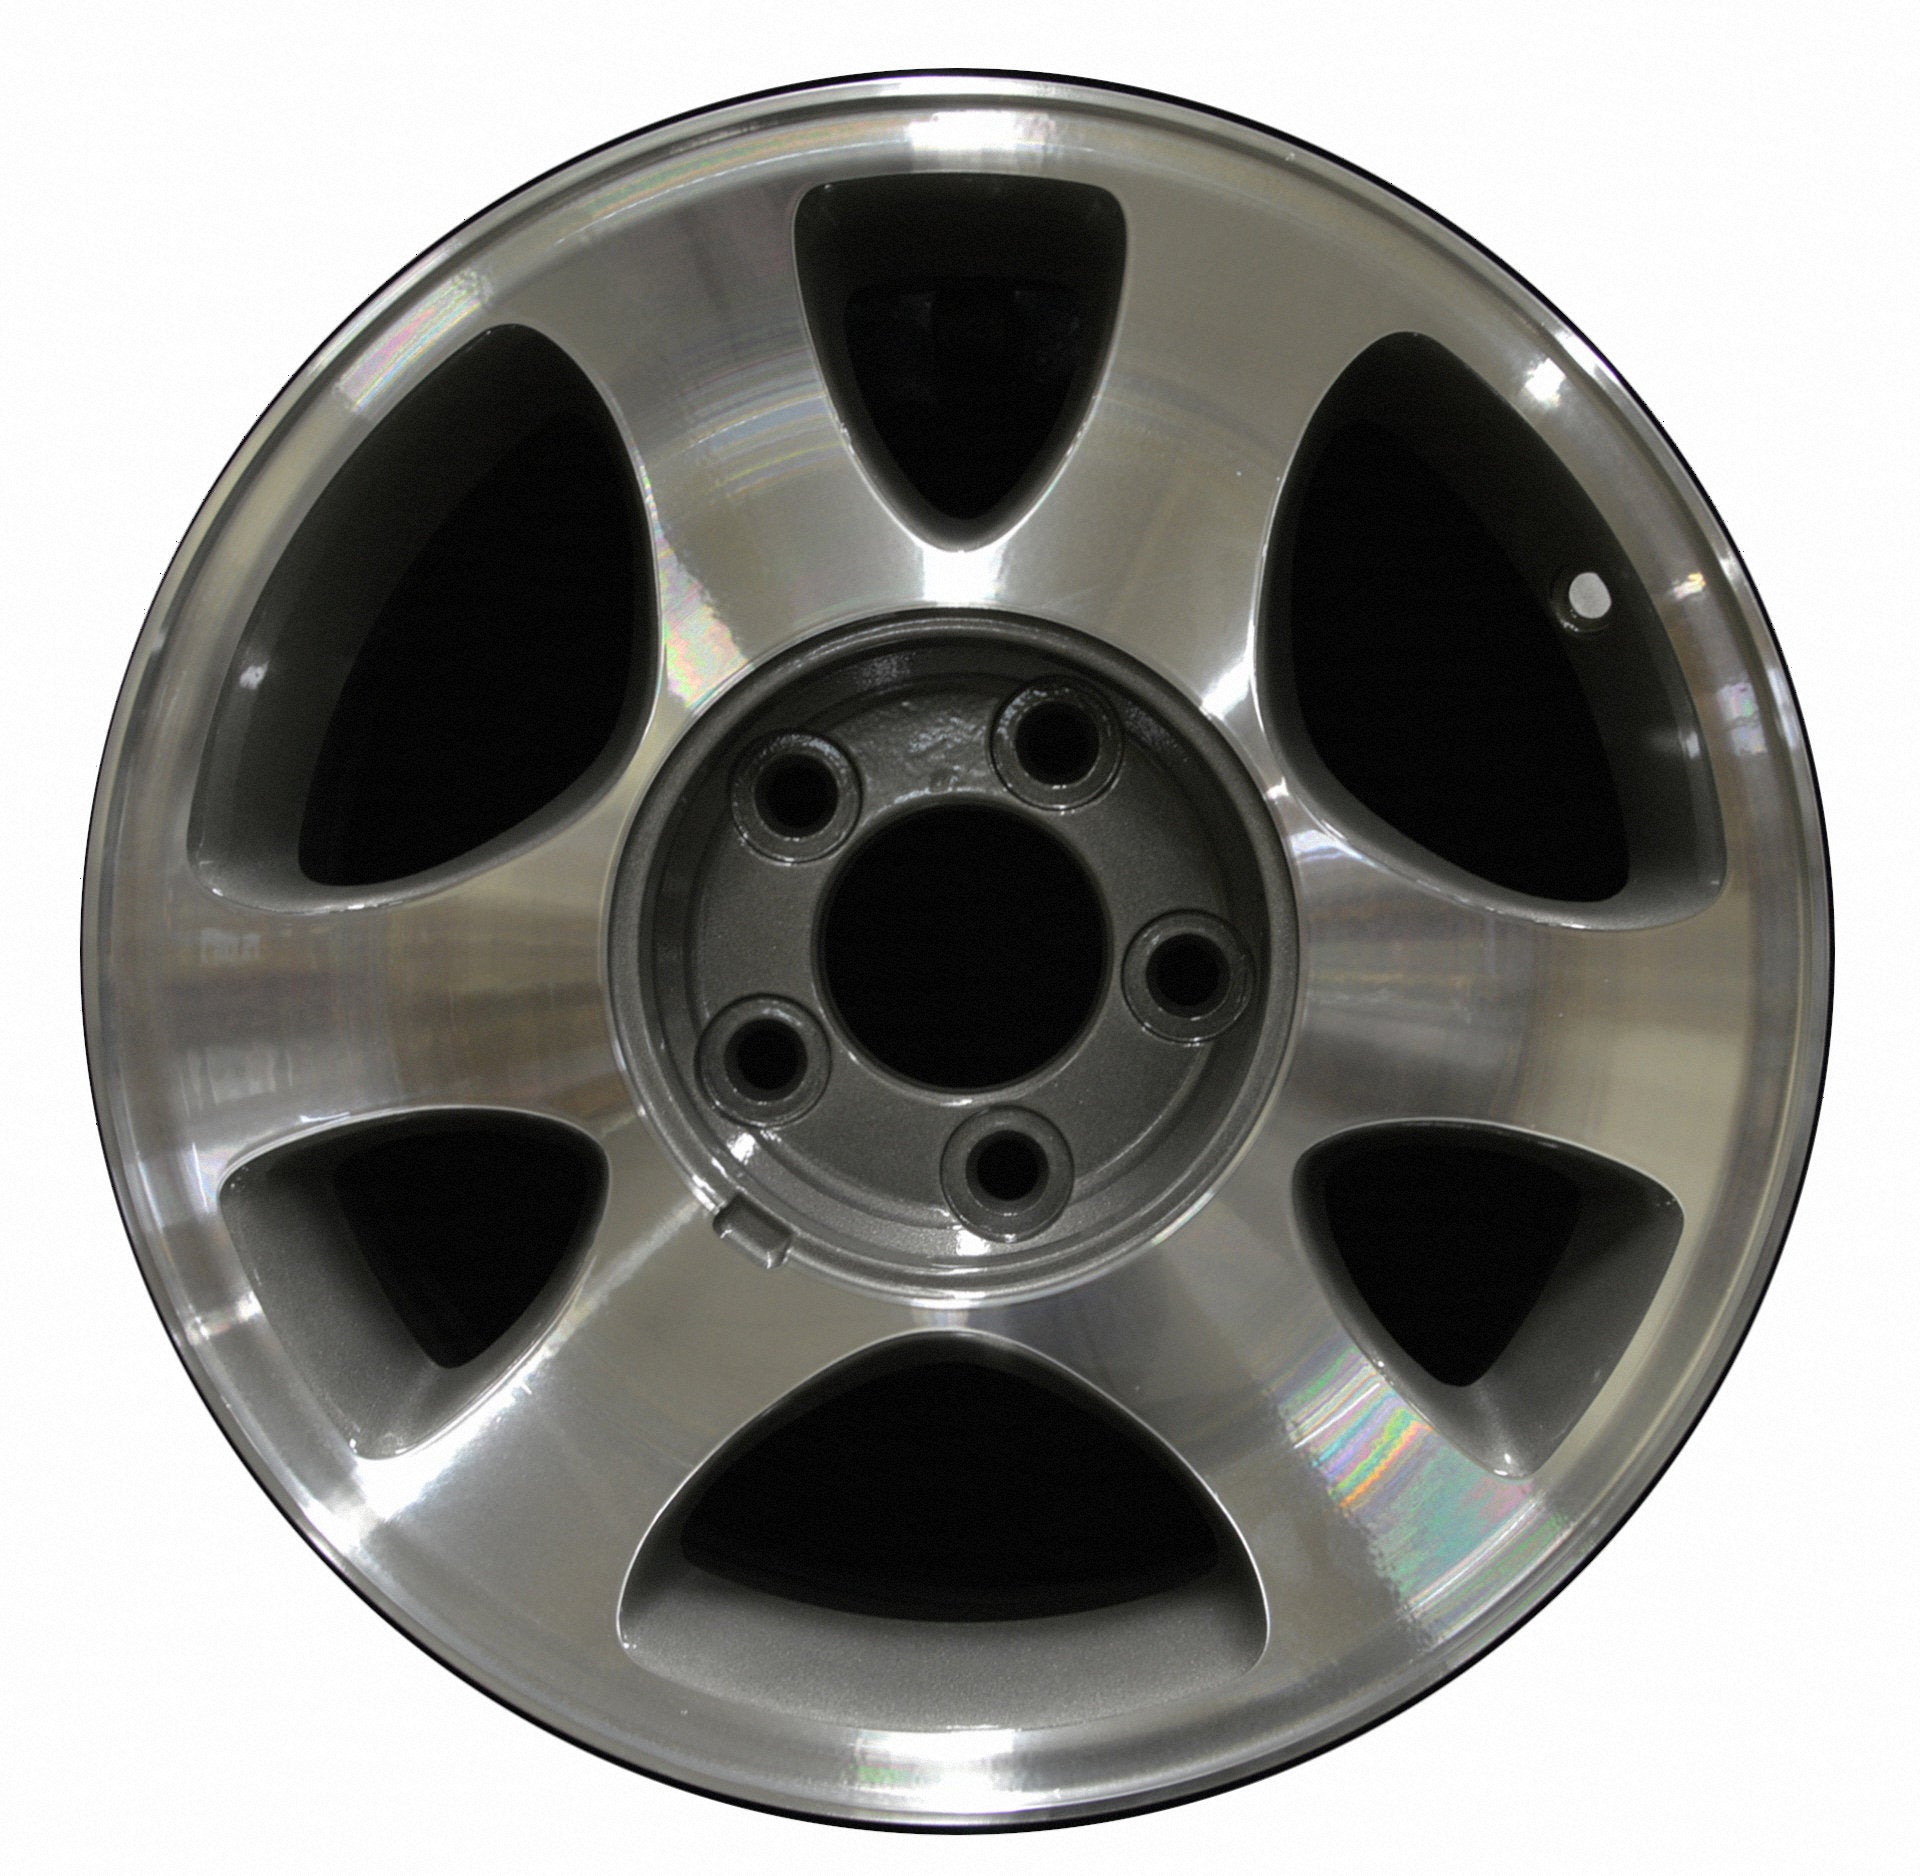 Ford Mustang  1999, 2000, 2001 Factory OEM Car Wheel Size 15x7 Alloy WAO.3304.PC03.MA